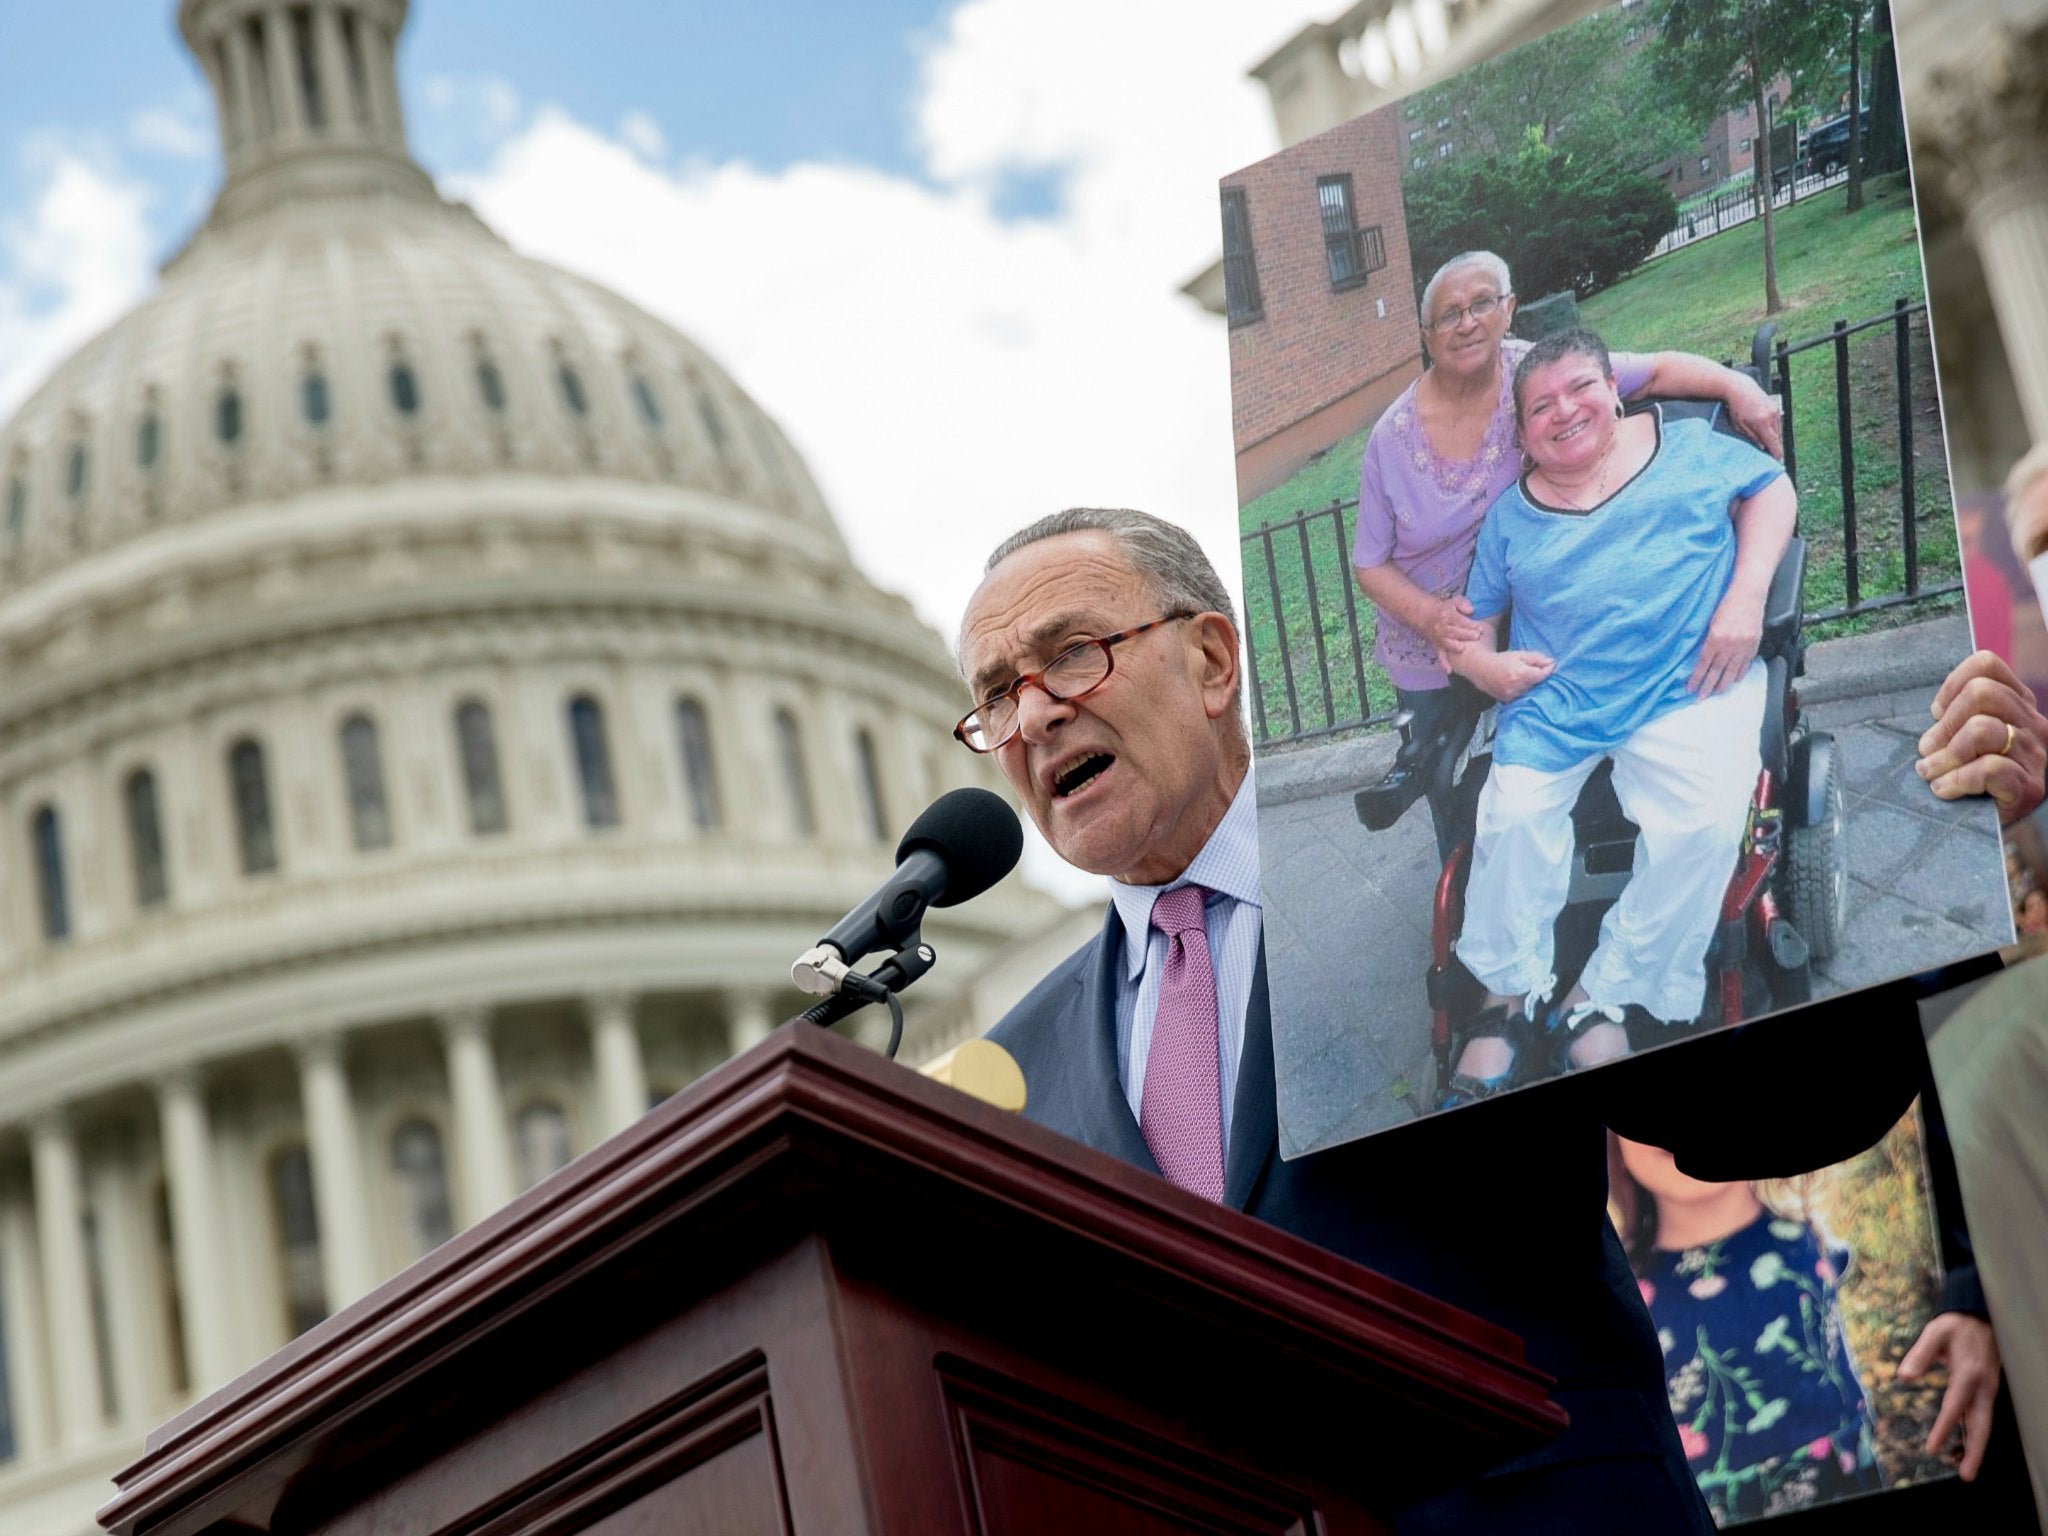 Senate Minority Leader Sen. Chuck Schumer talks about constituents who would be adversely affected by the proposed Republican Senate healthcare bill outside the Capitol Building